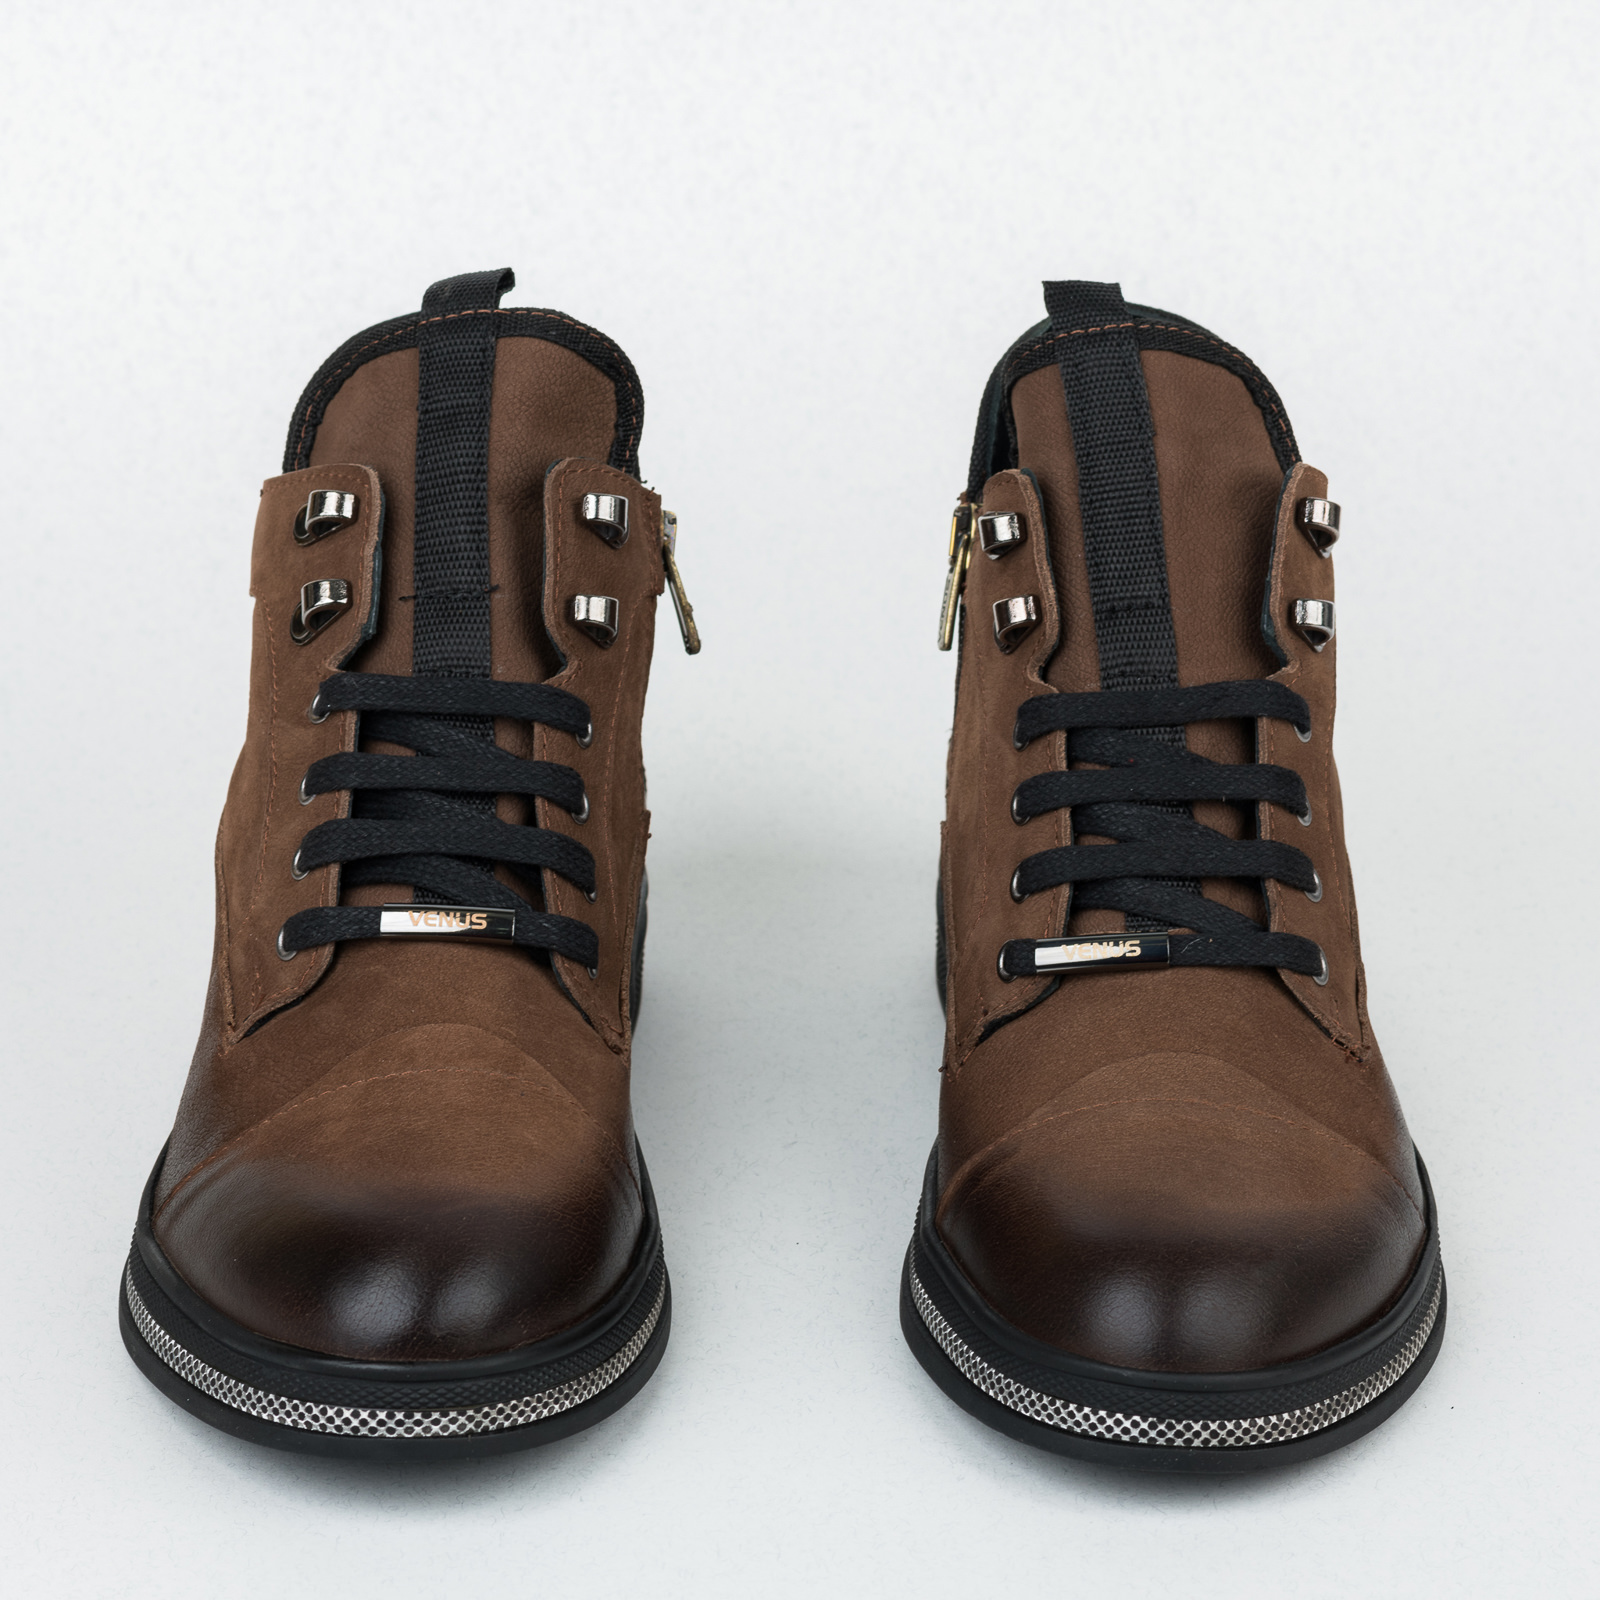 Leather ankle boots B071 - BROWN